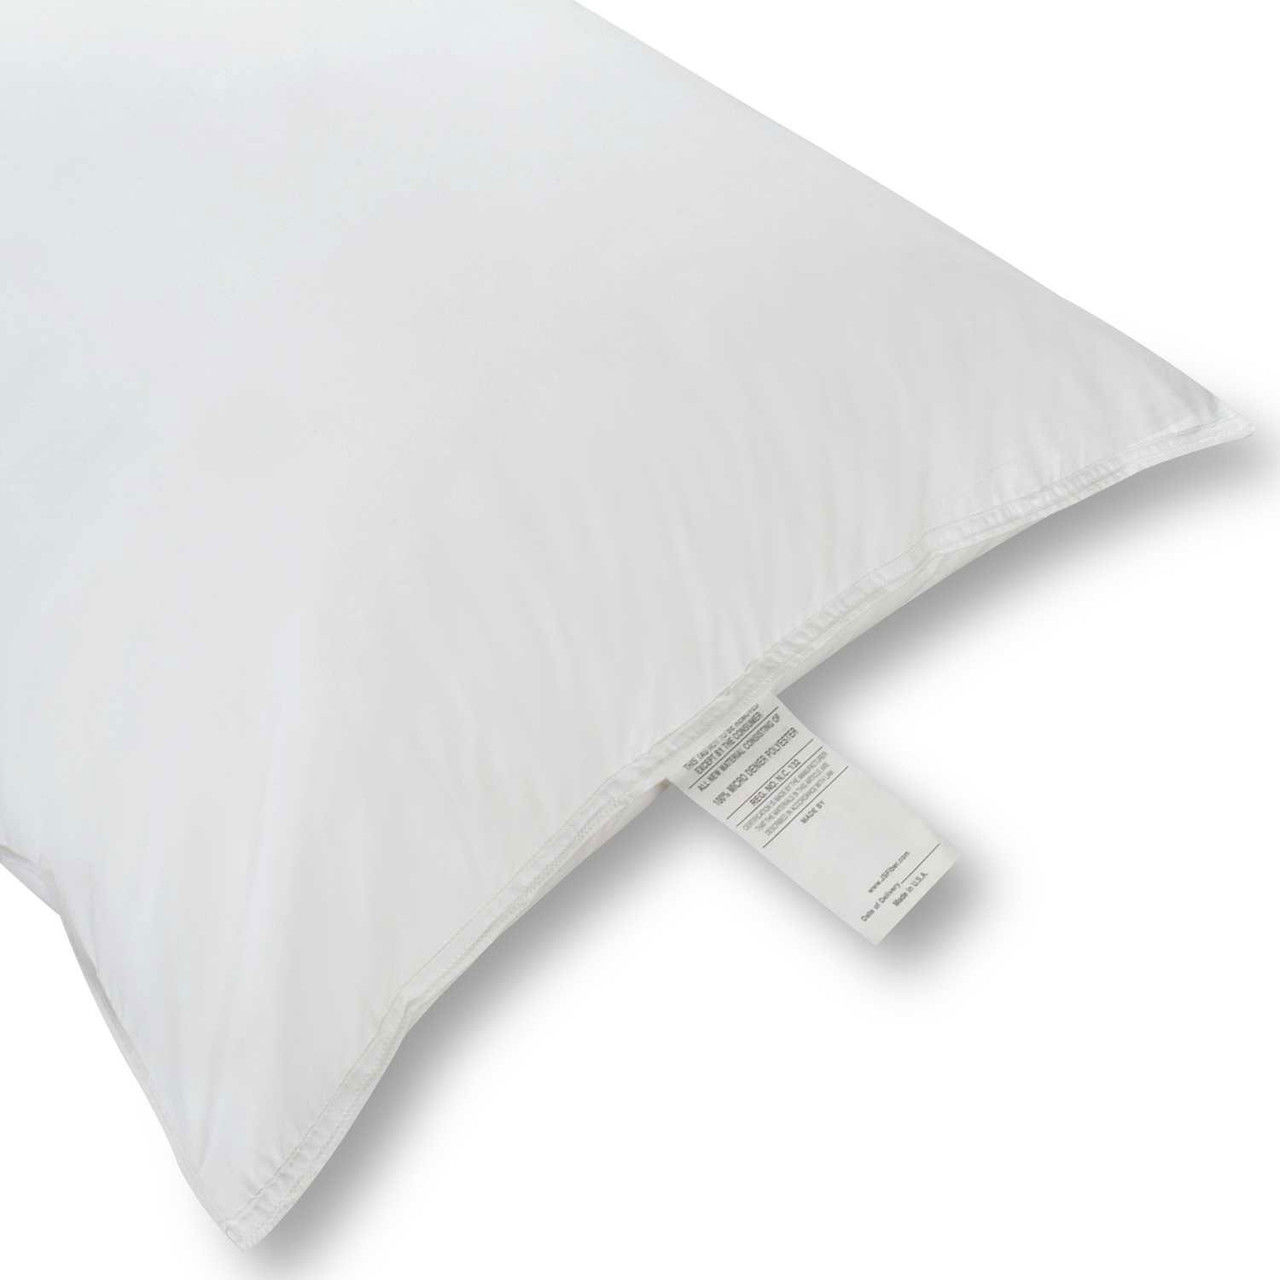 Are there various fill weight options for the standard size ultra down pillow?